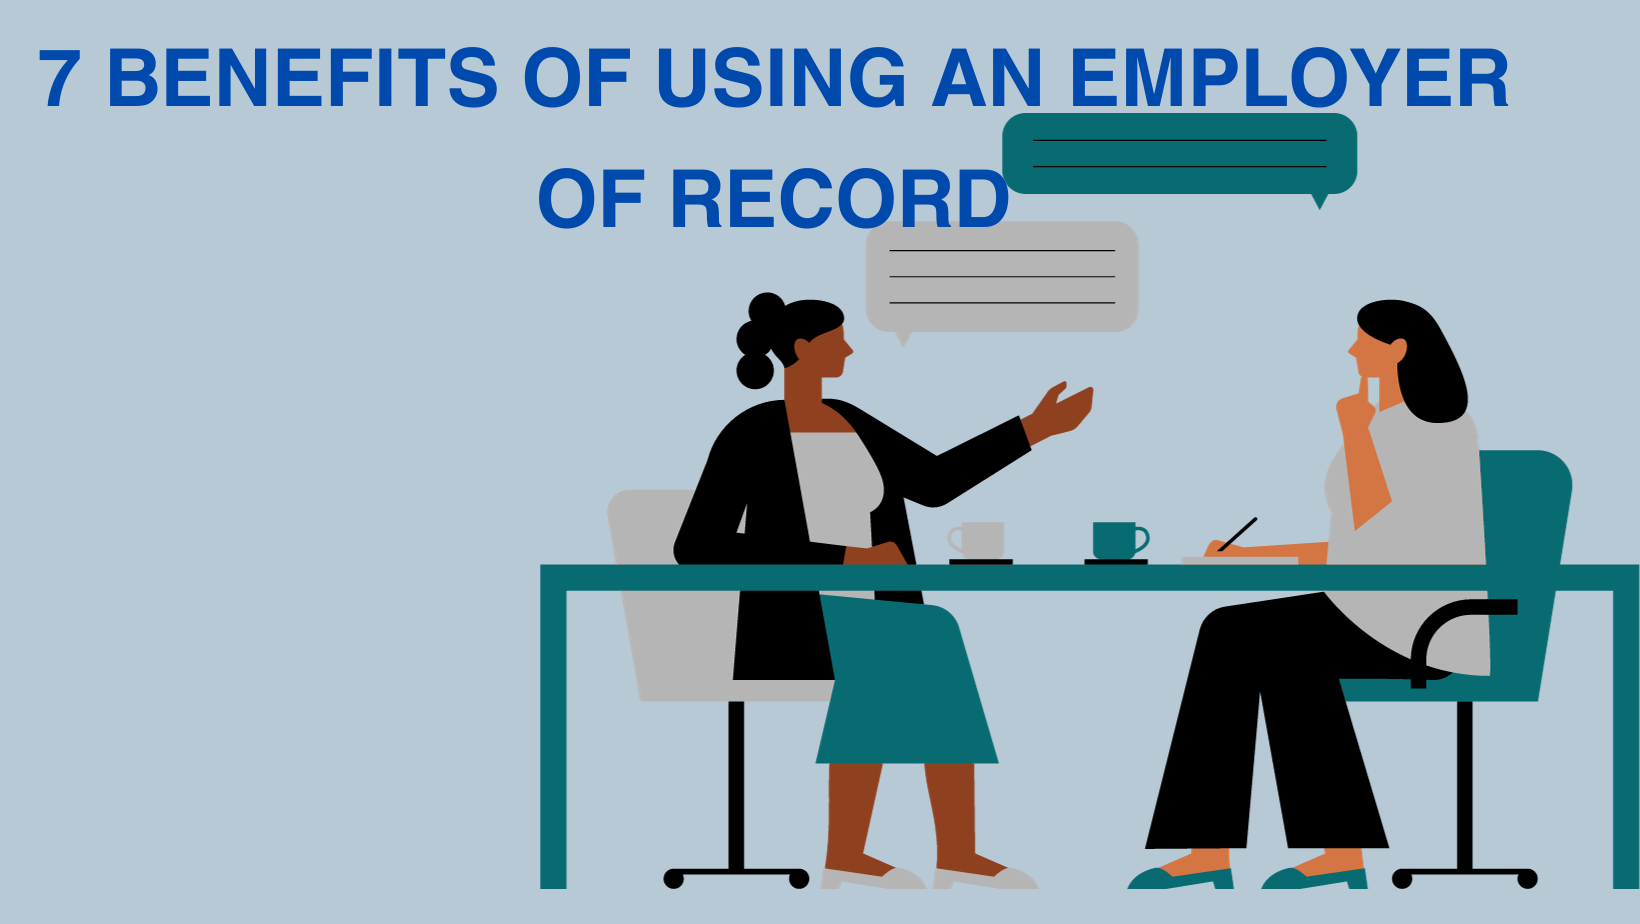 alt = "Benefits of employer of record"